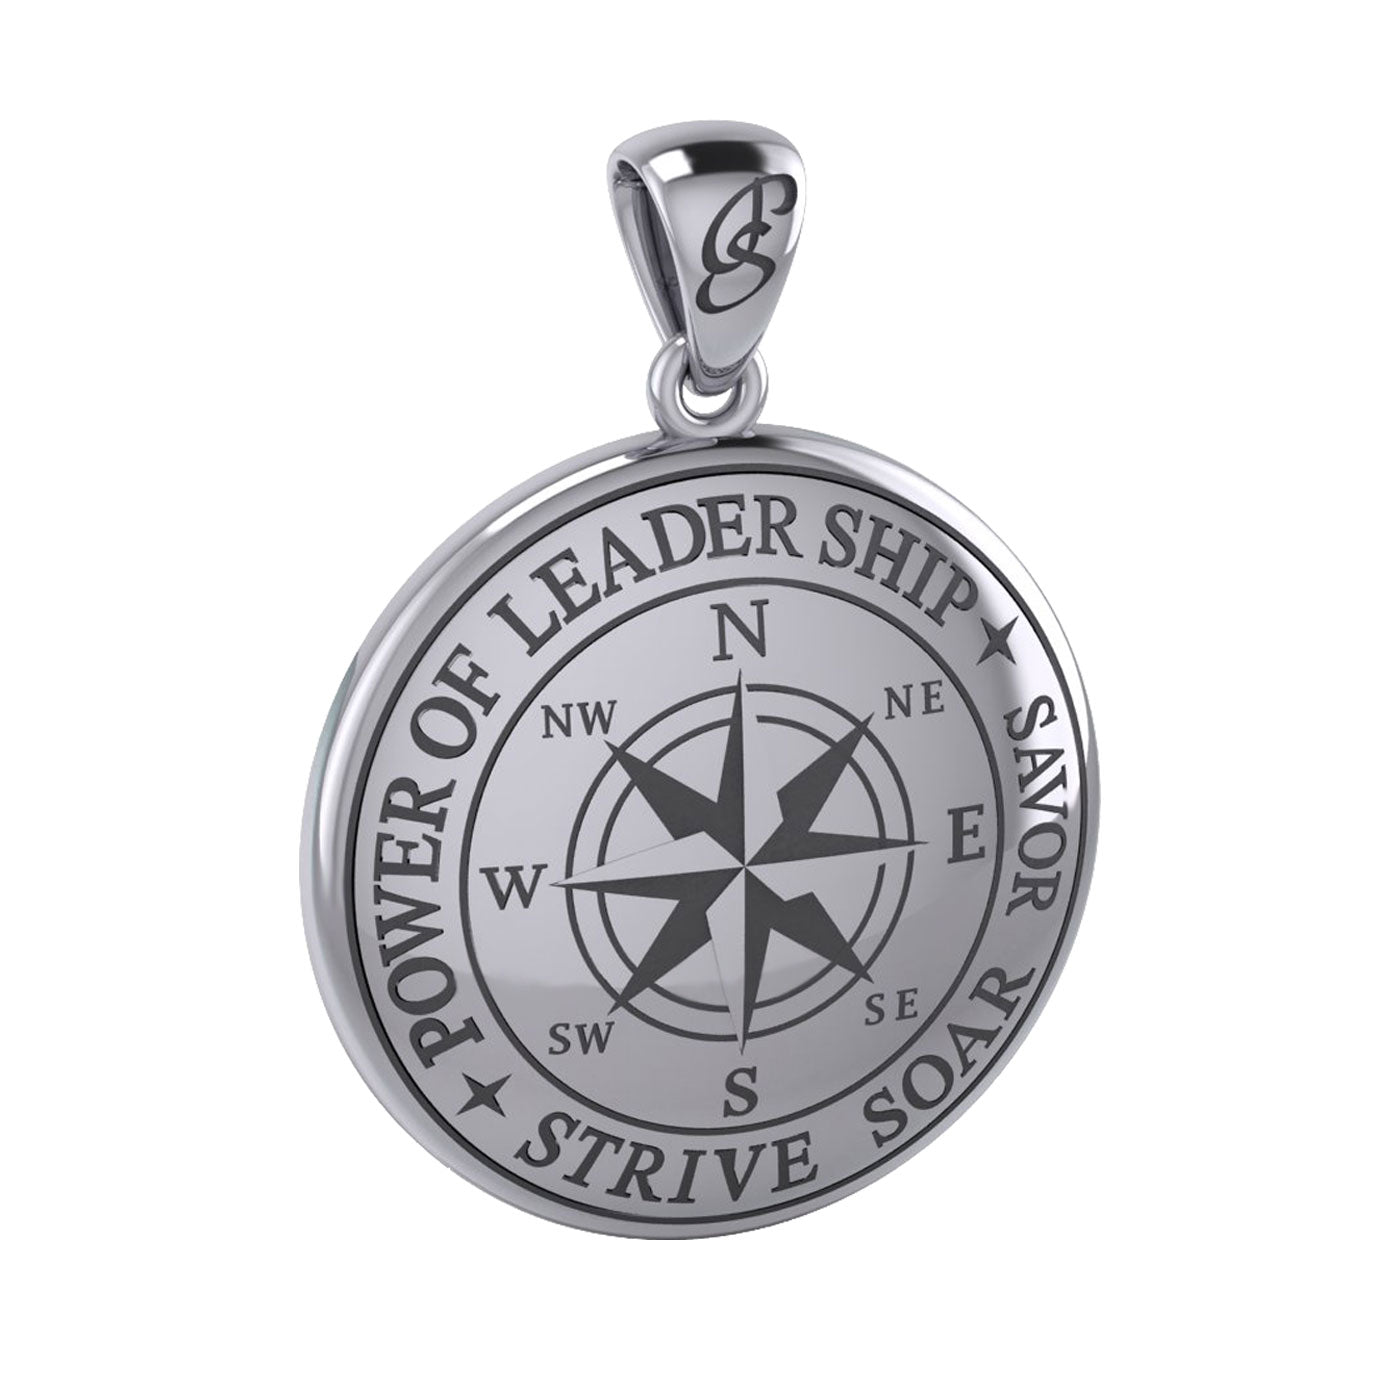 The Compass Rose Silver Pendant with the Power of Leadership Engraving TPD6162